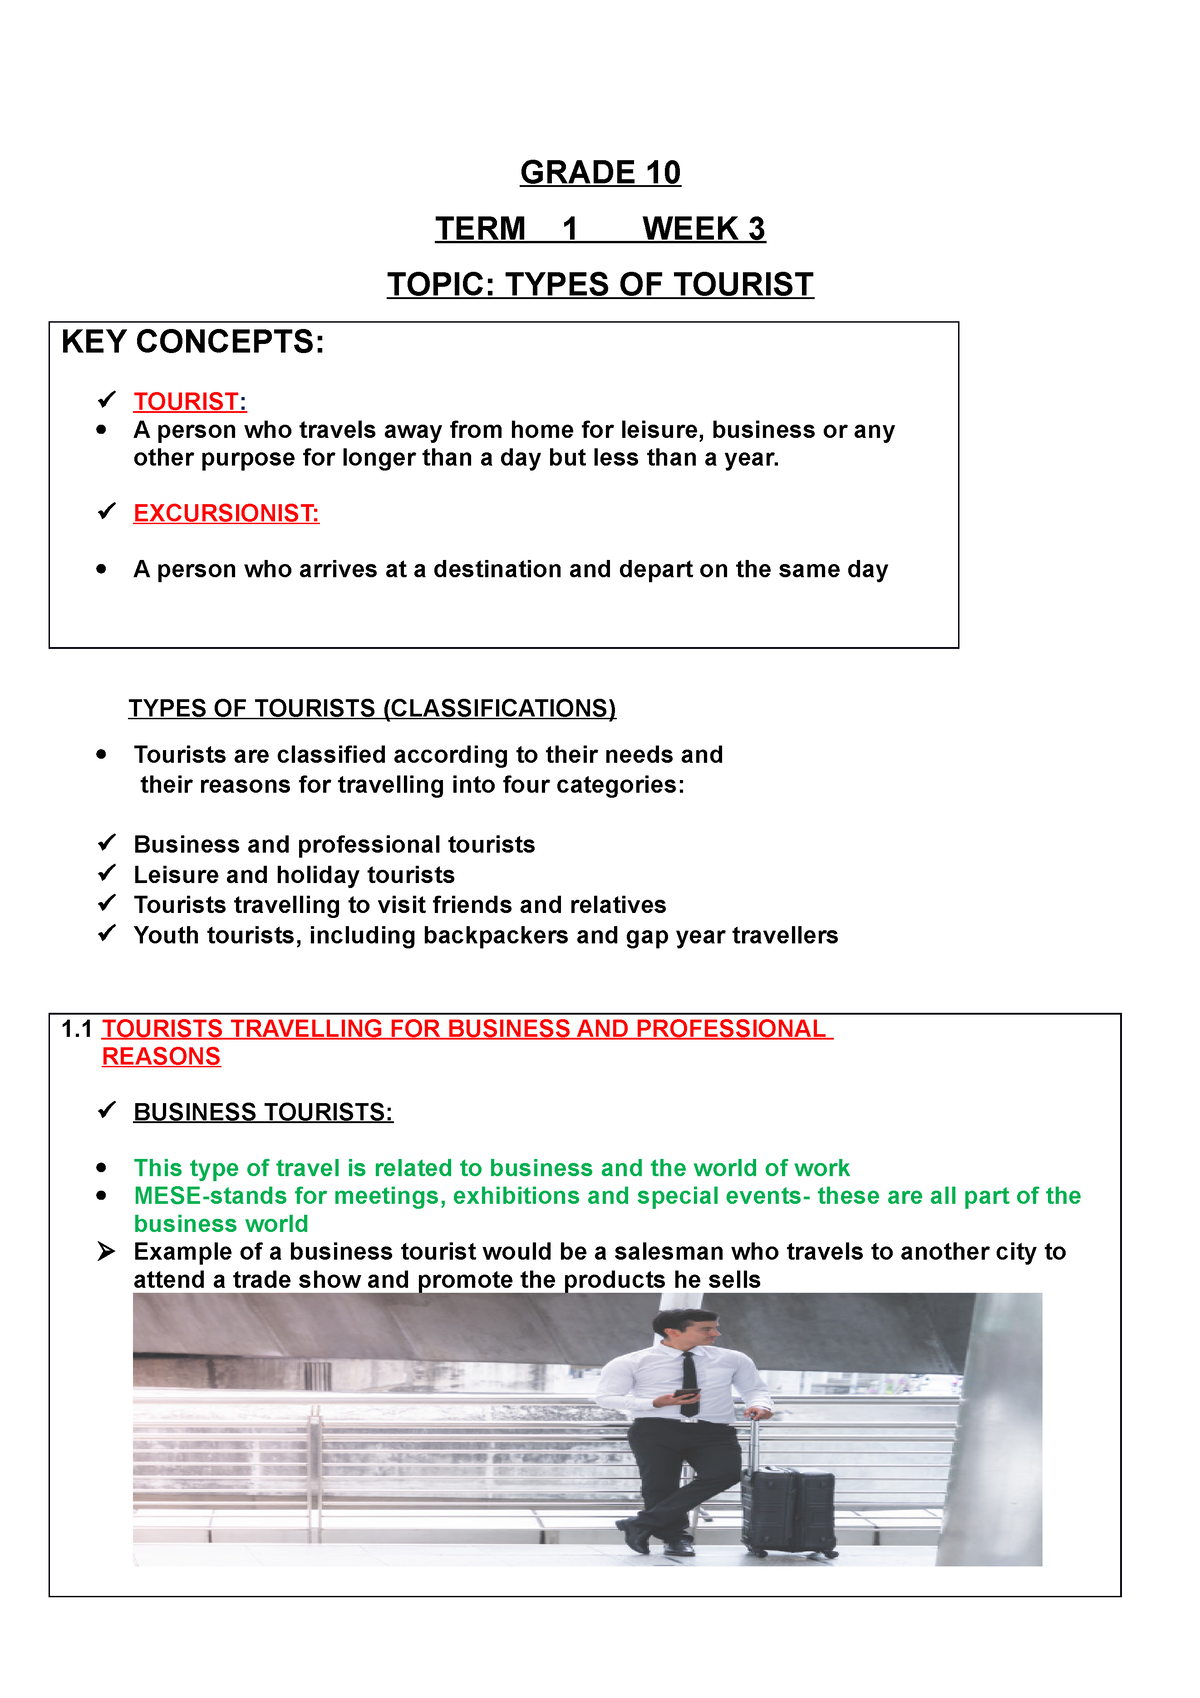 what is tourism in grade 10